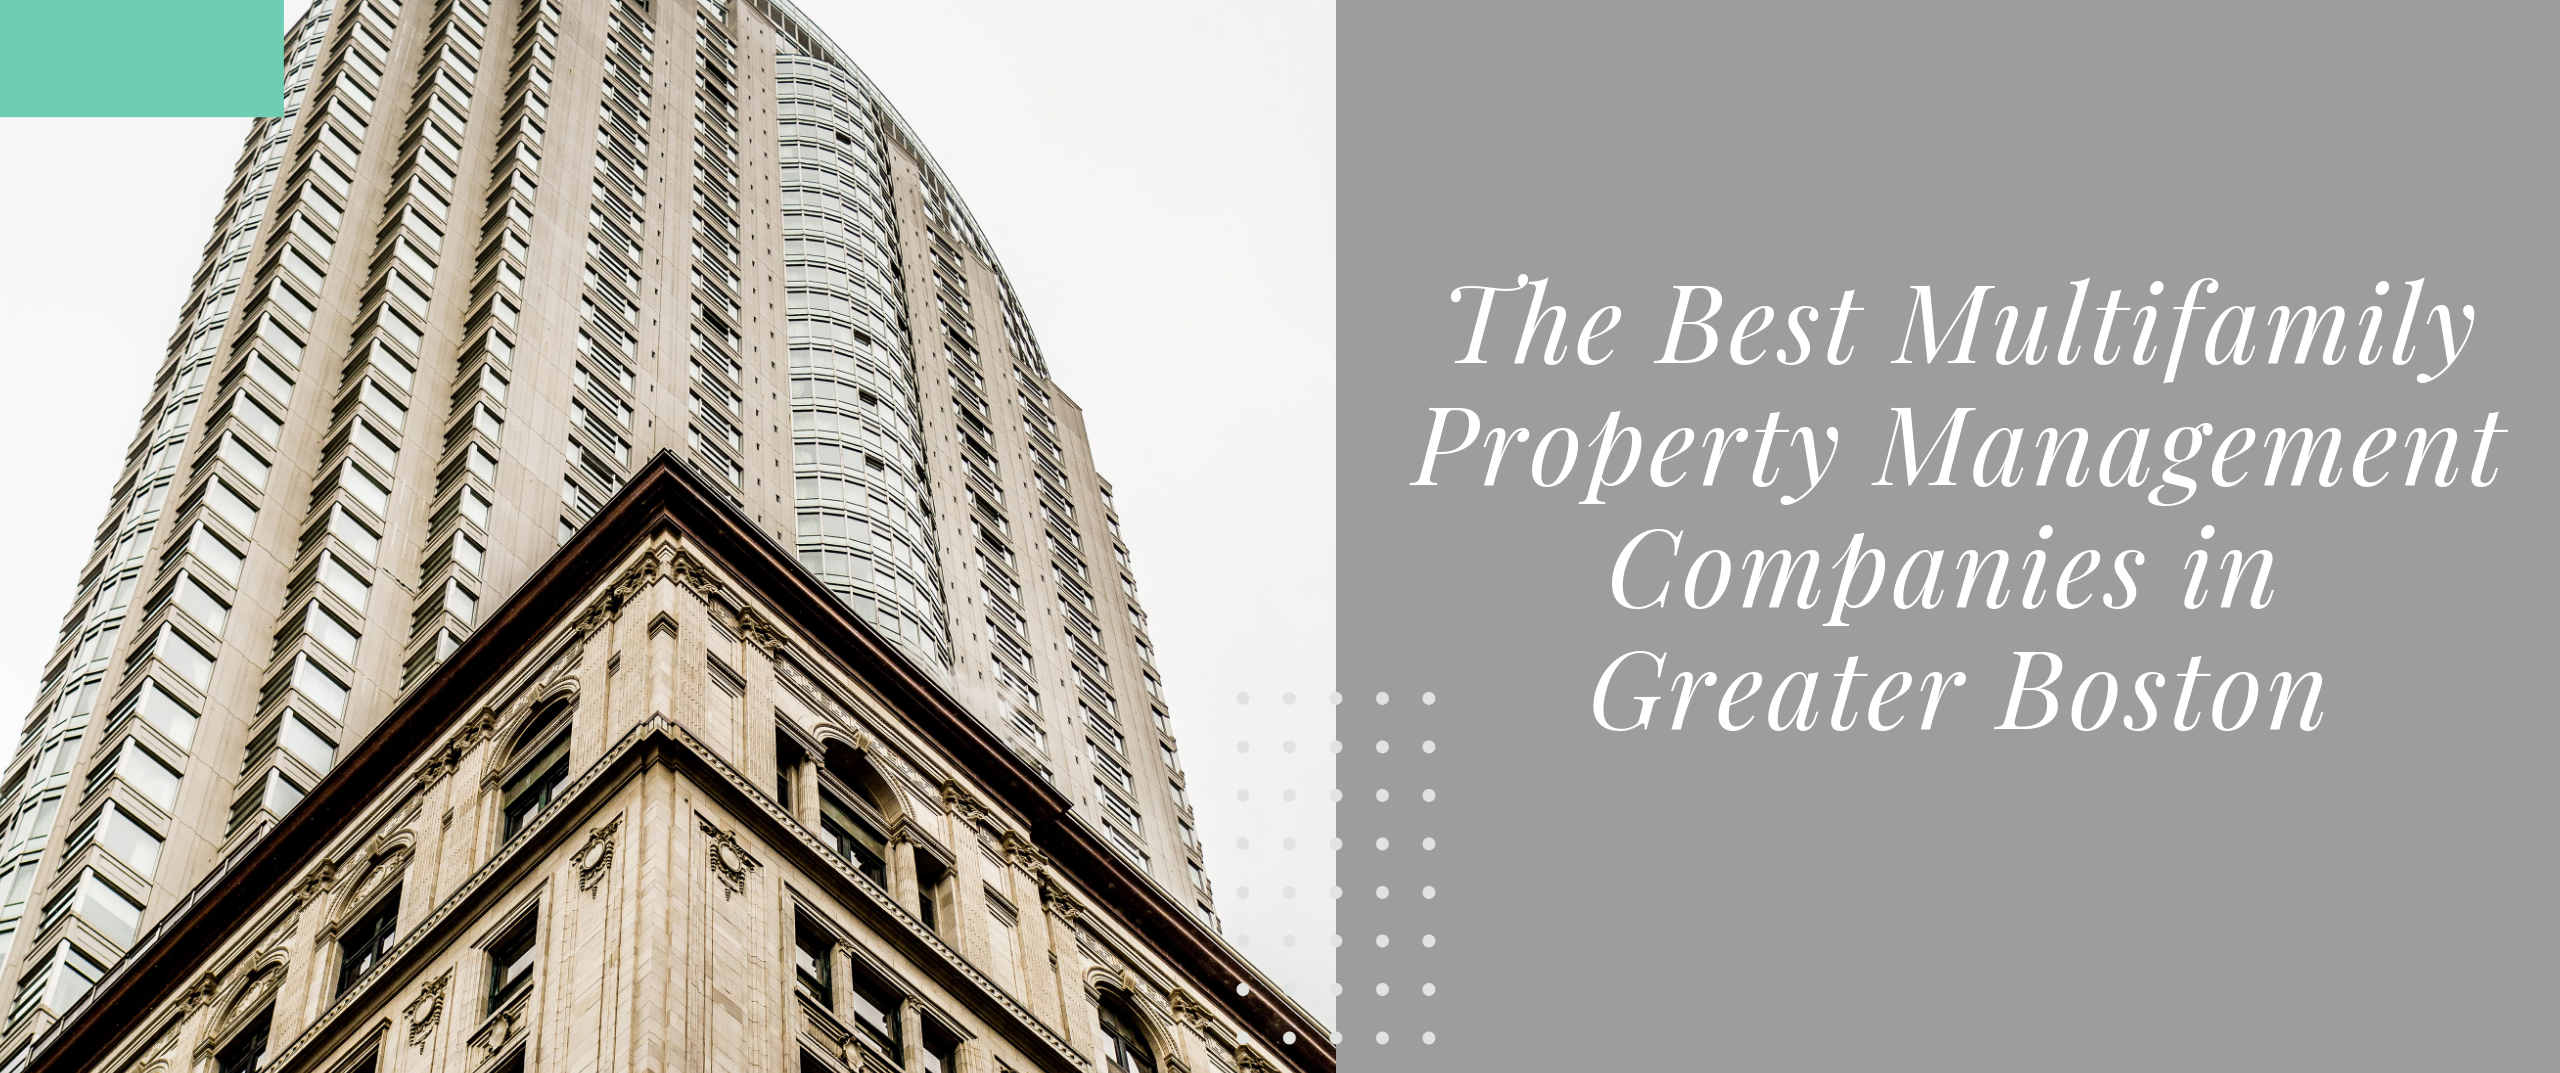 The Best Multifamily Property Management Companies in Greater Boston